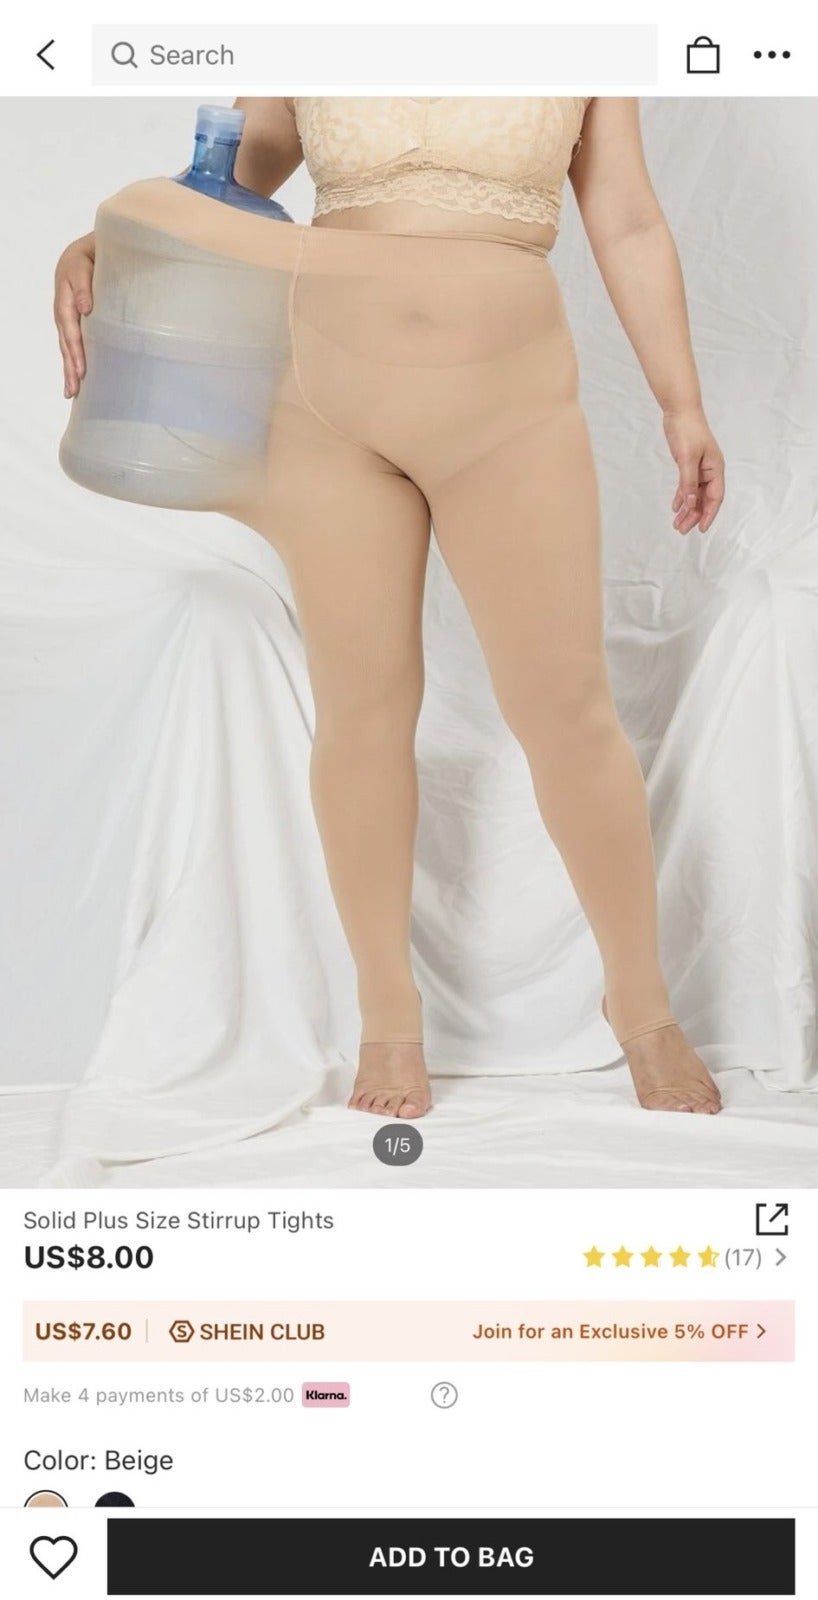 SHEIN Gets Bashed For Shoving Water Container in Tights, Instead of Using  Plus Sized Models - WORLD OF BUZZ